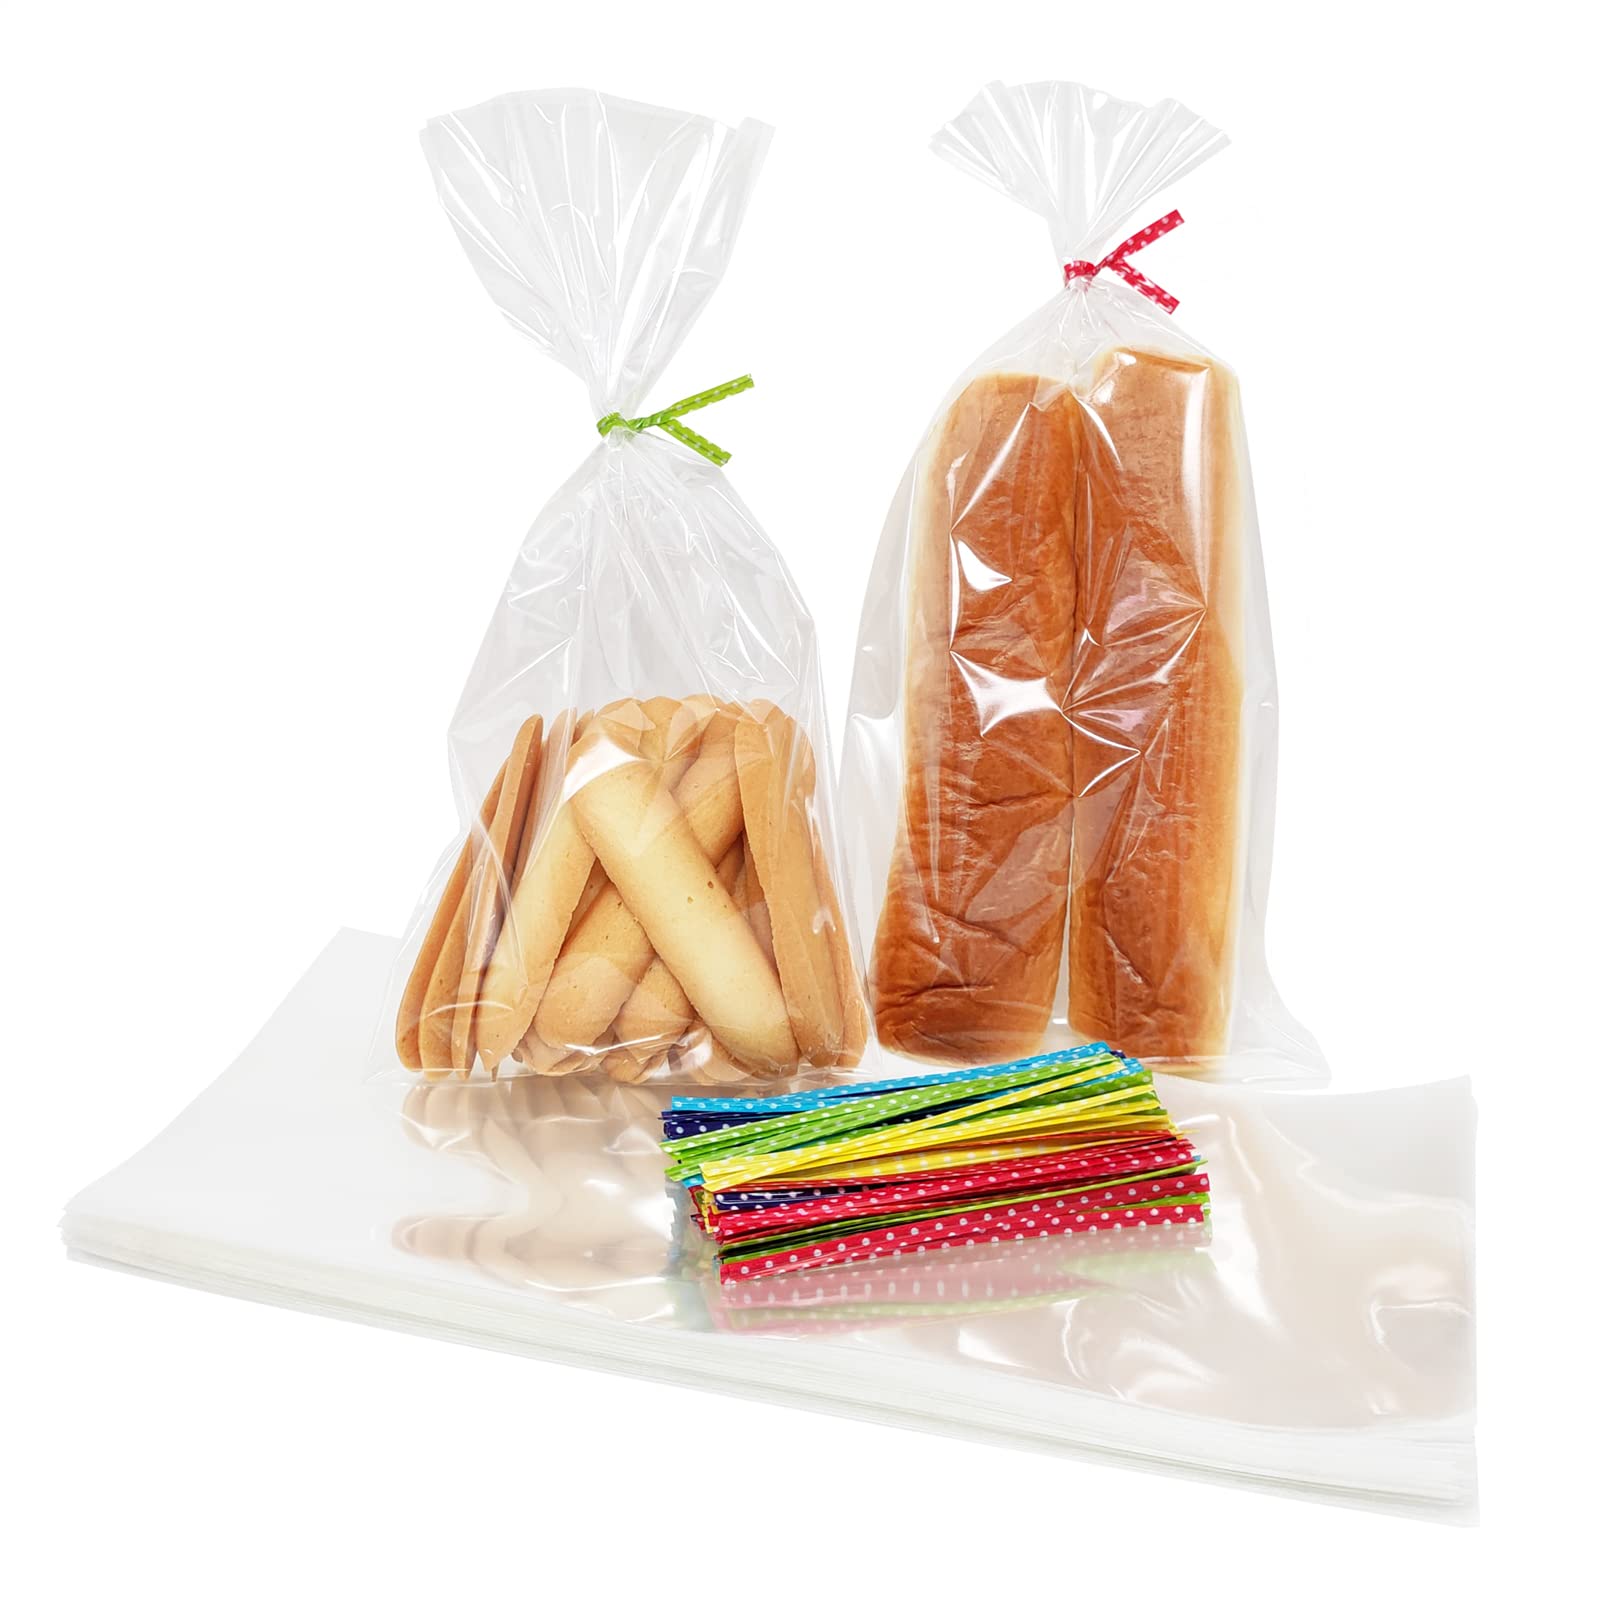 Newkita 5x11 Cellophane Bags, Clear Goodie Bags, Cake Pop Rice Crispy Bags With 4